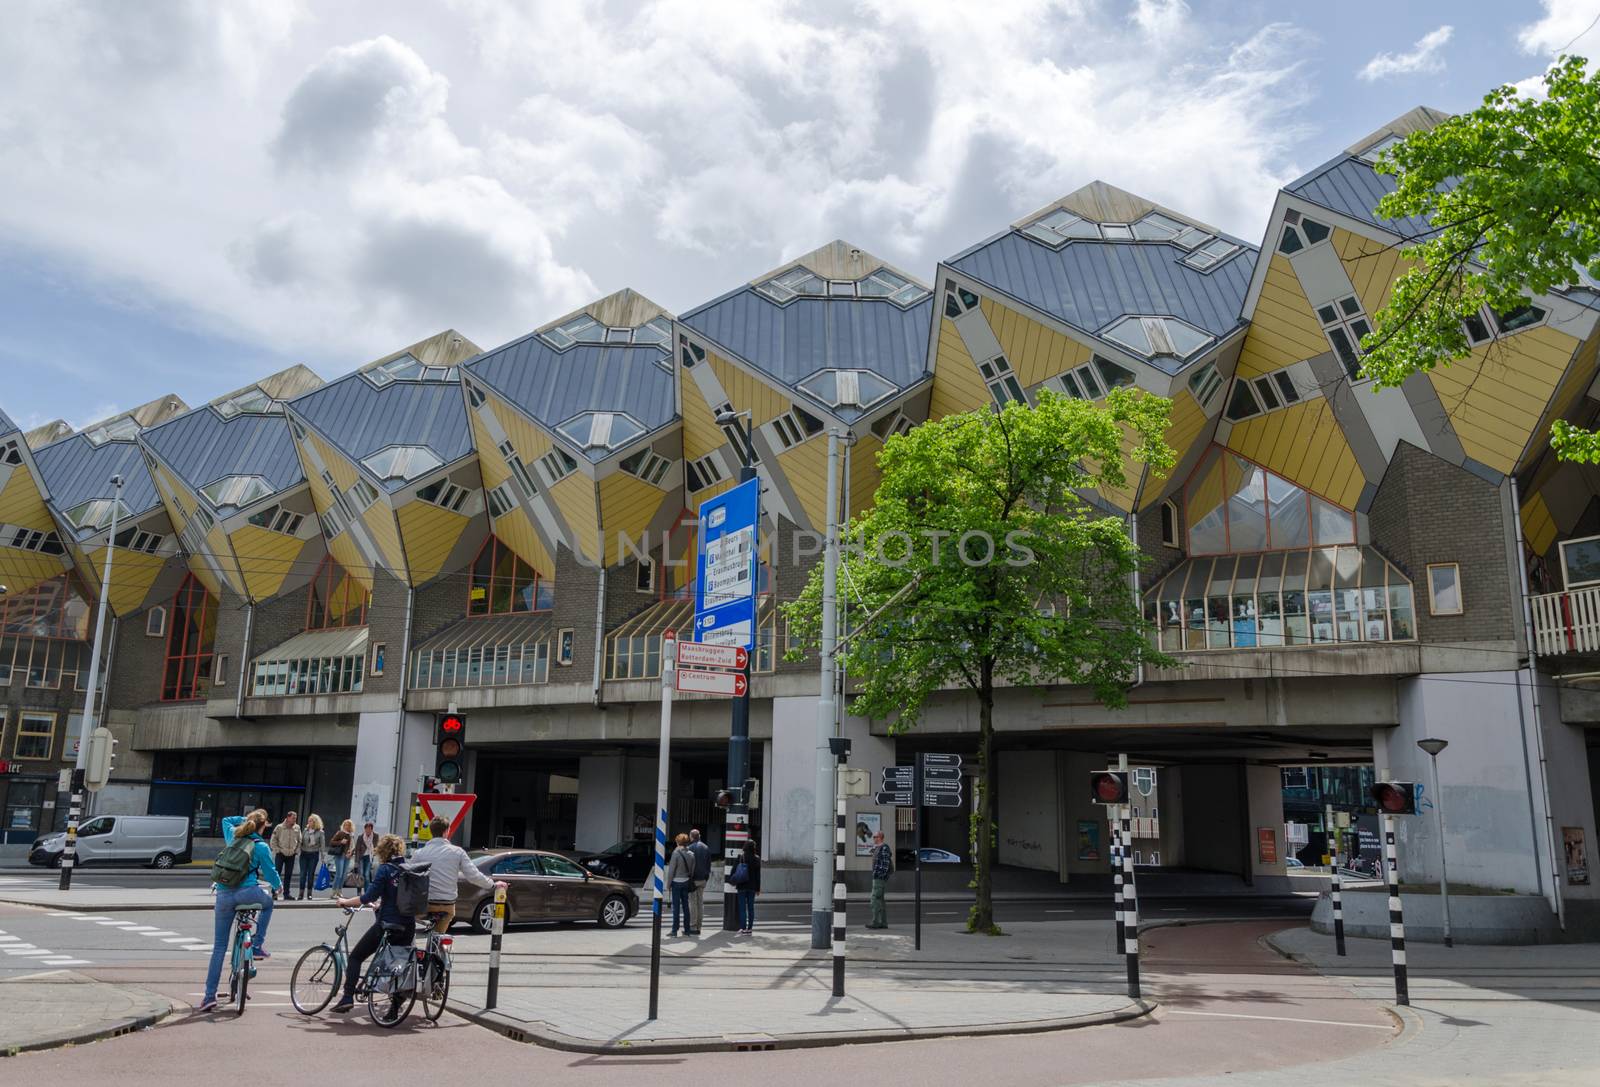 Rotterdam, Netherlands - May 9, 2015: Tourist visit Cube Houses the iconic in the center of the city. Cube Houses are a set of innovative houses built in Rotterdam and Helmond in the Netherlands, designed by architect Piet Blom.